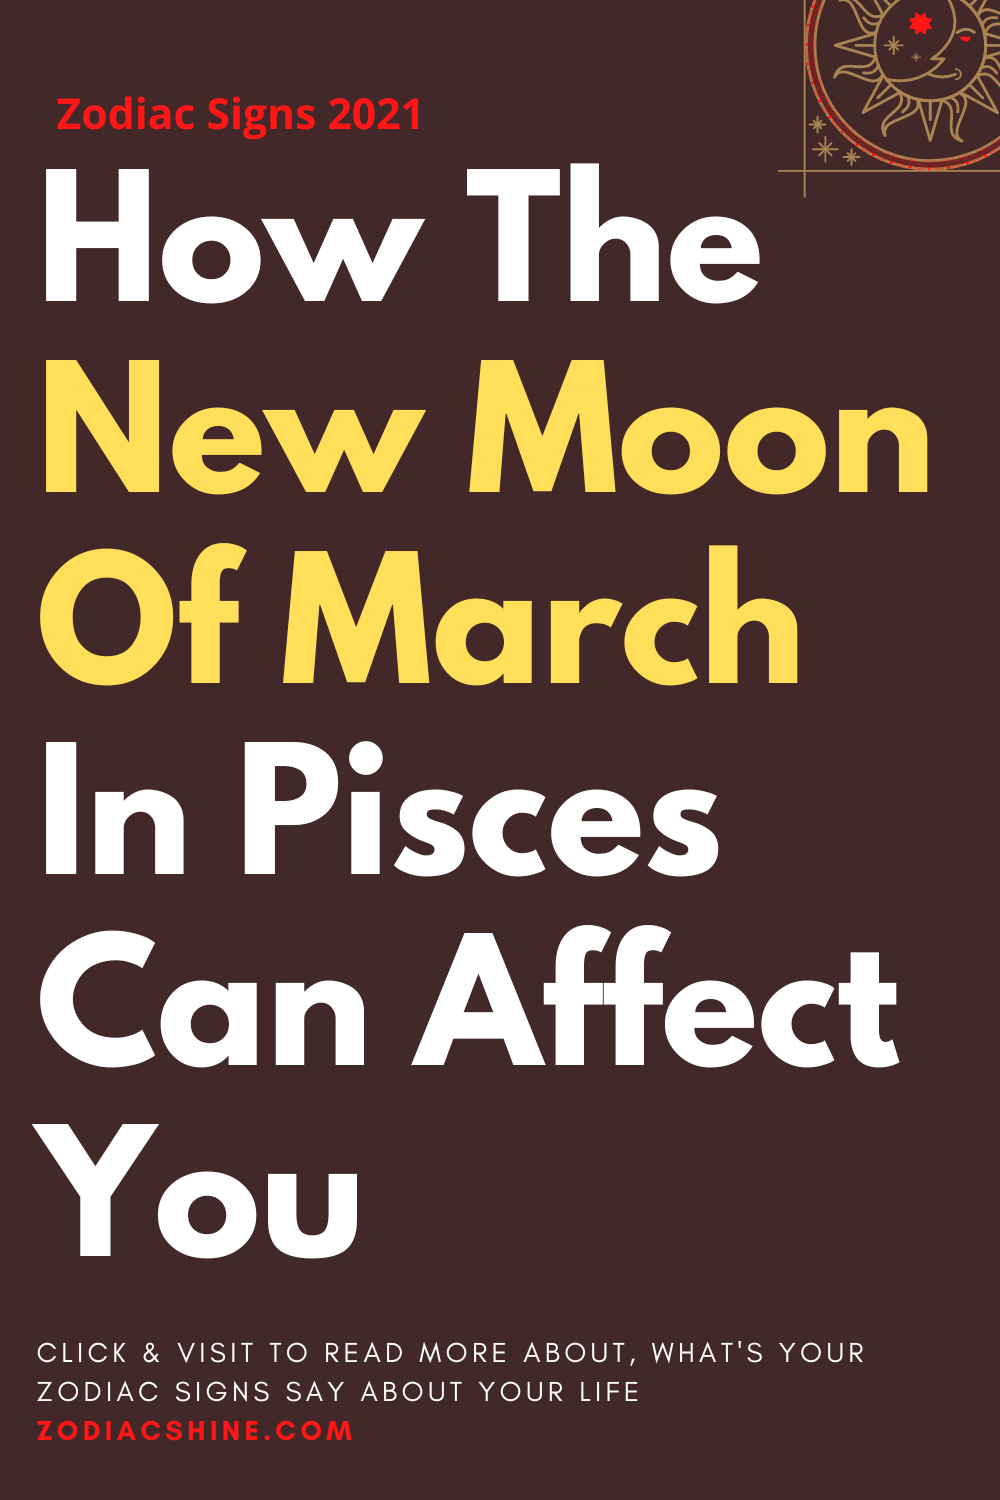 How The New Moon Of March In Pisces Can Affect You